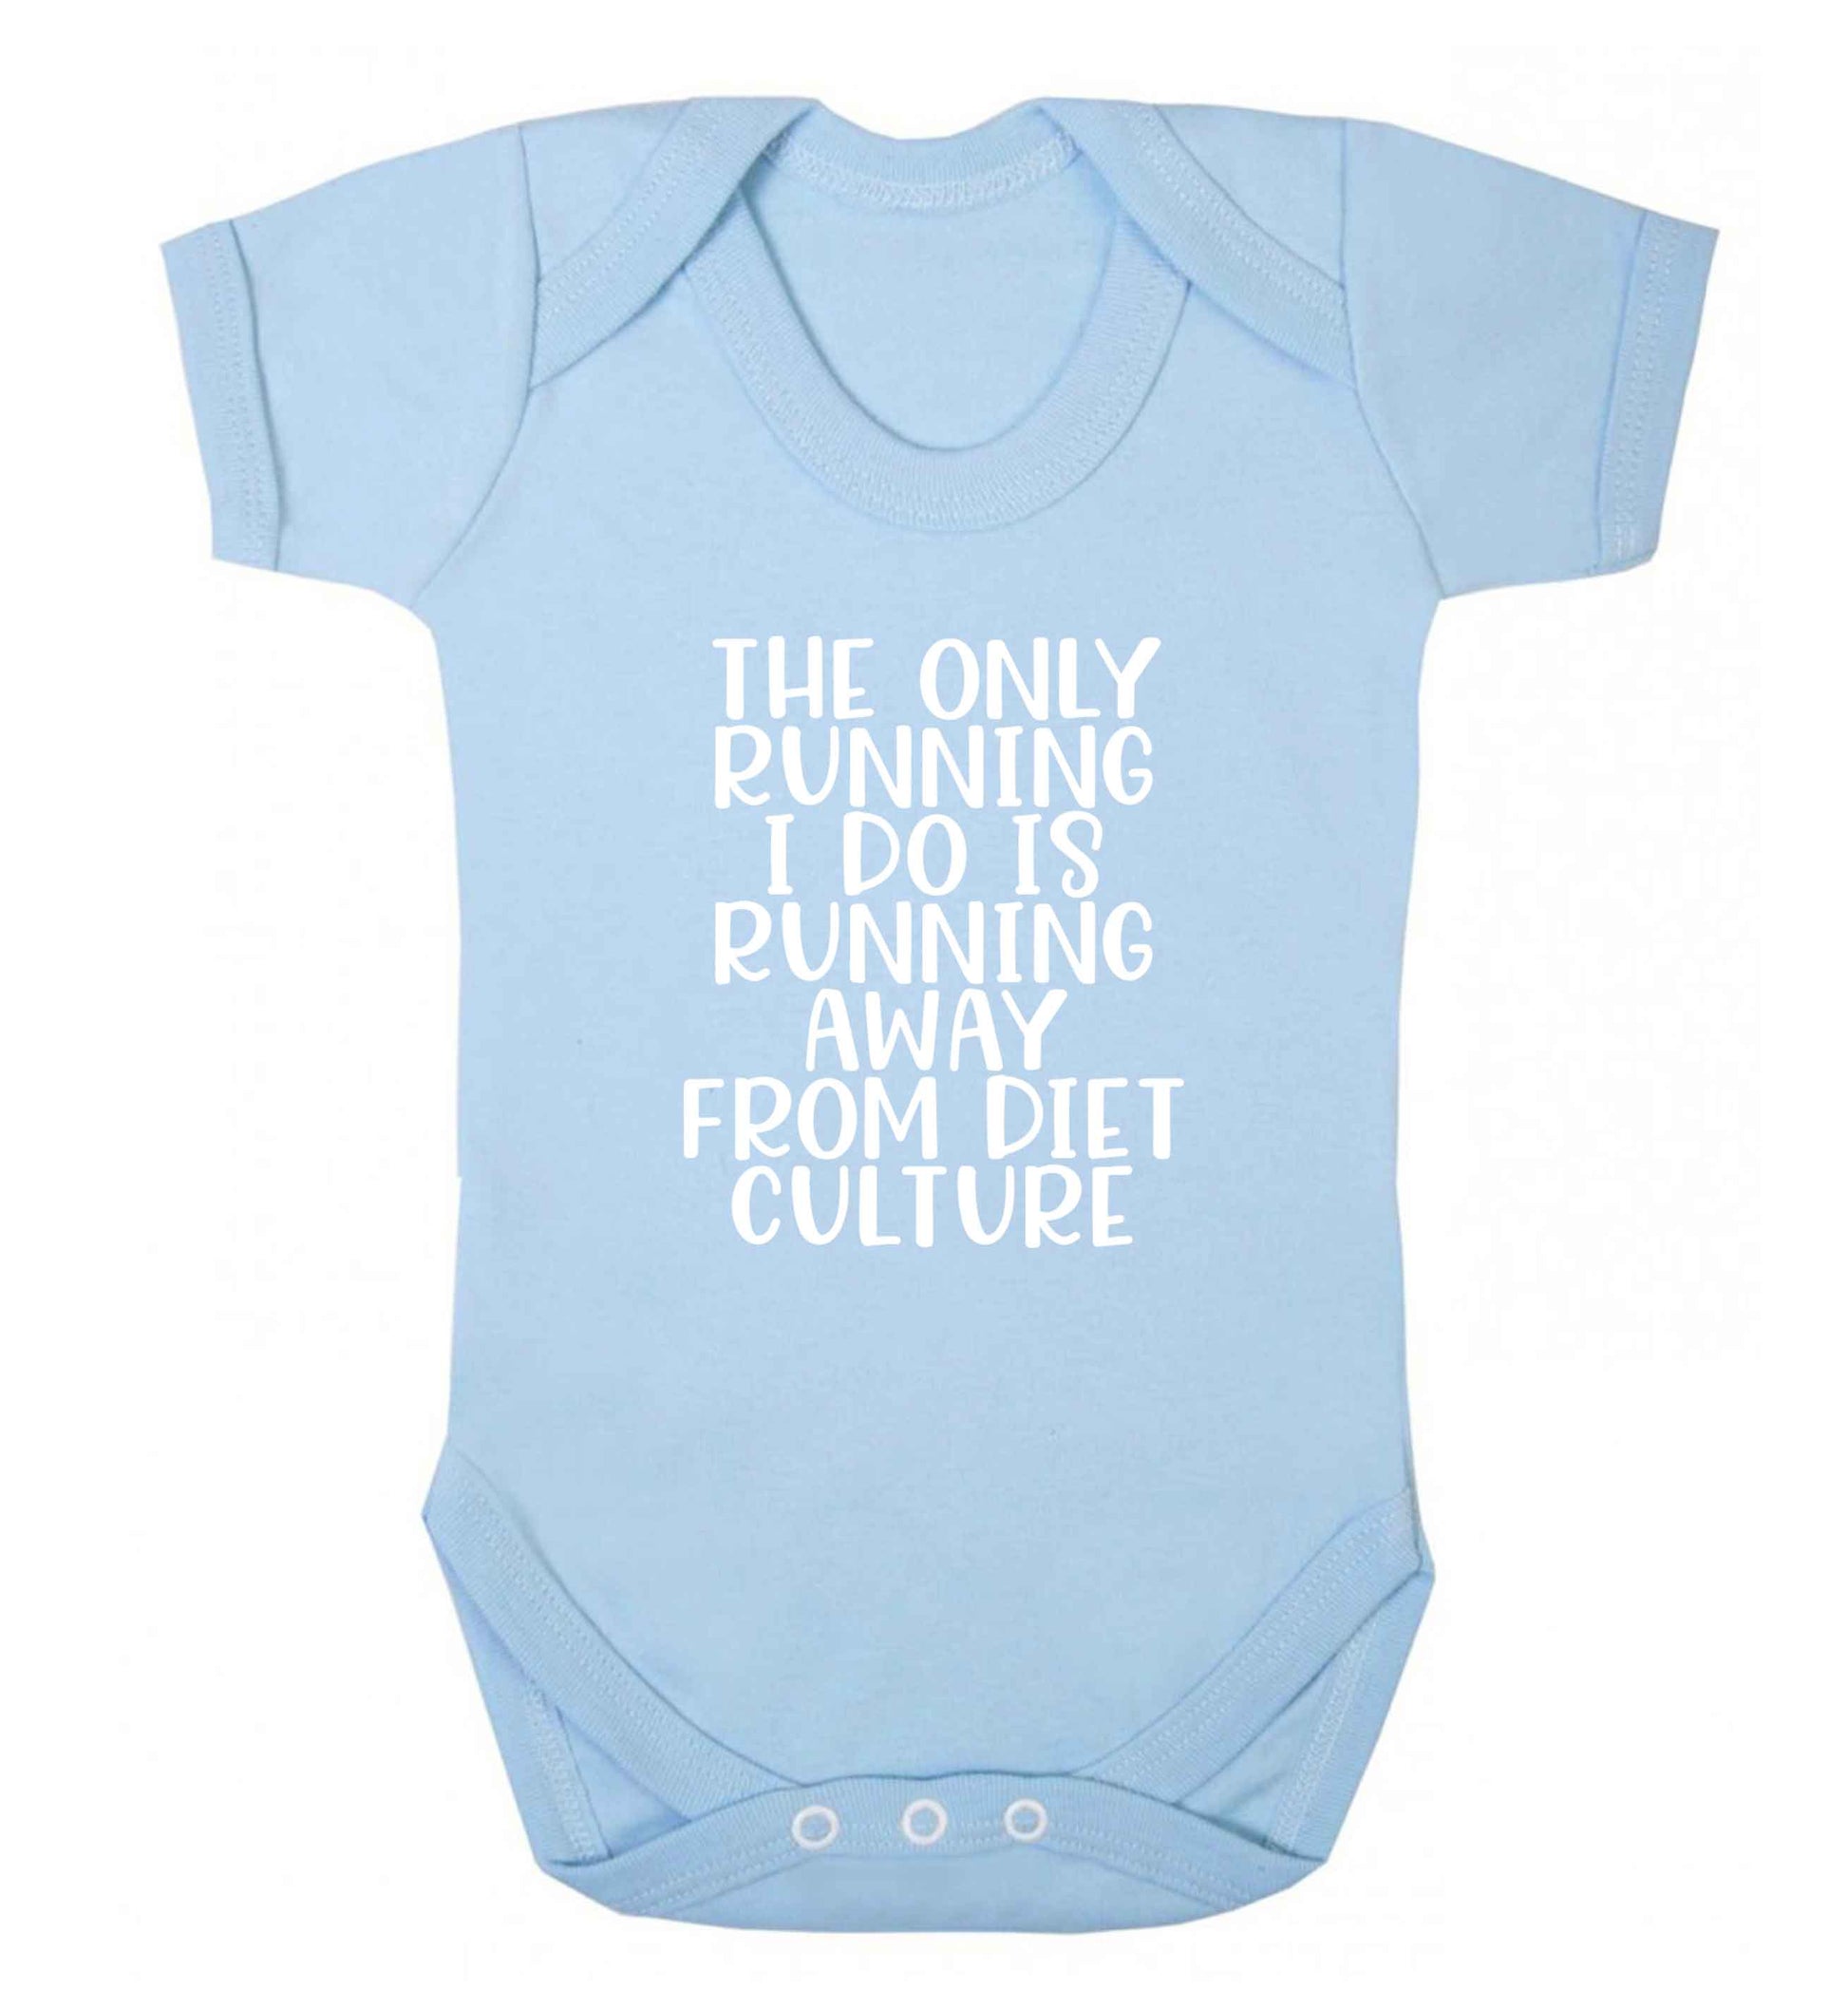 The only running I do is running away from diet culture baby vest pale blue 18-24 months